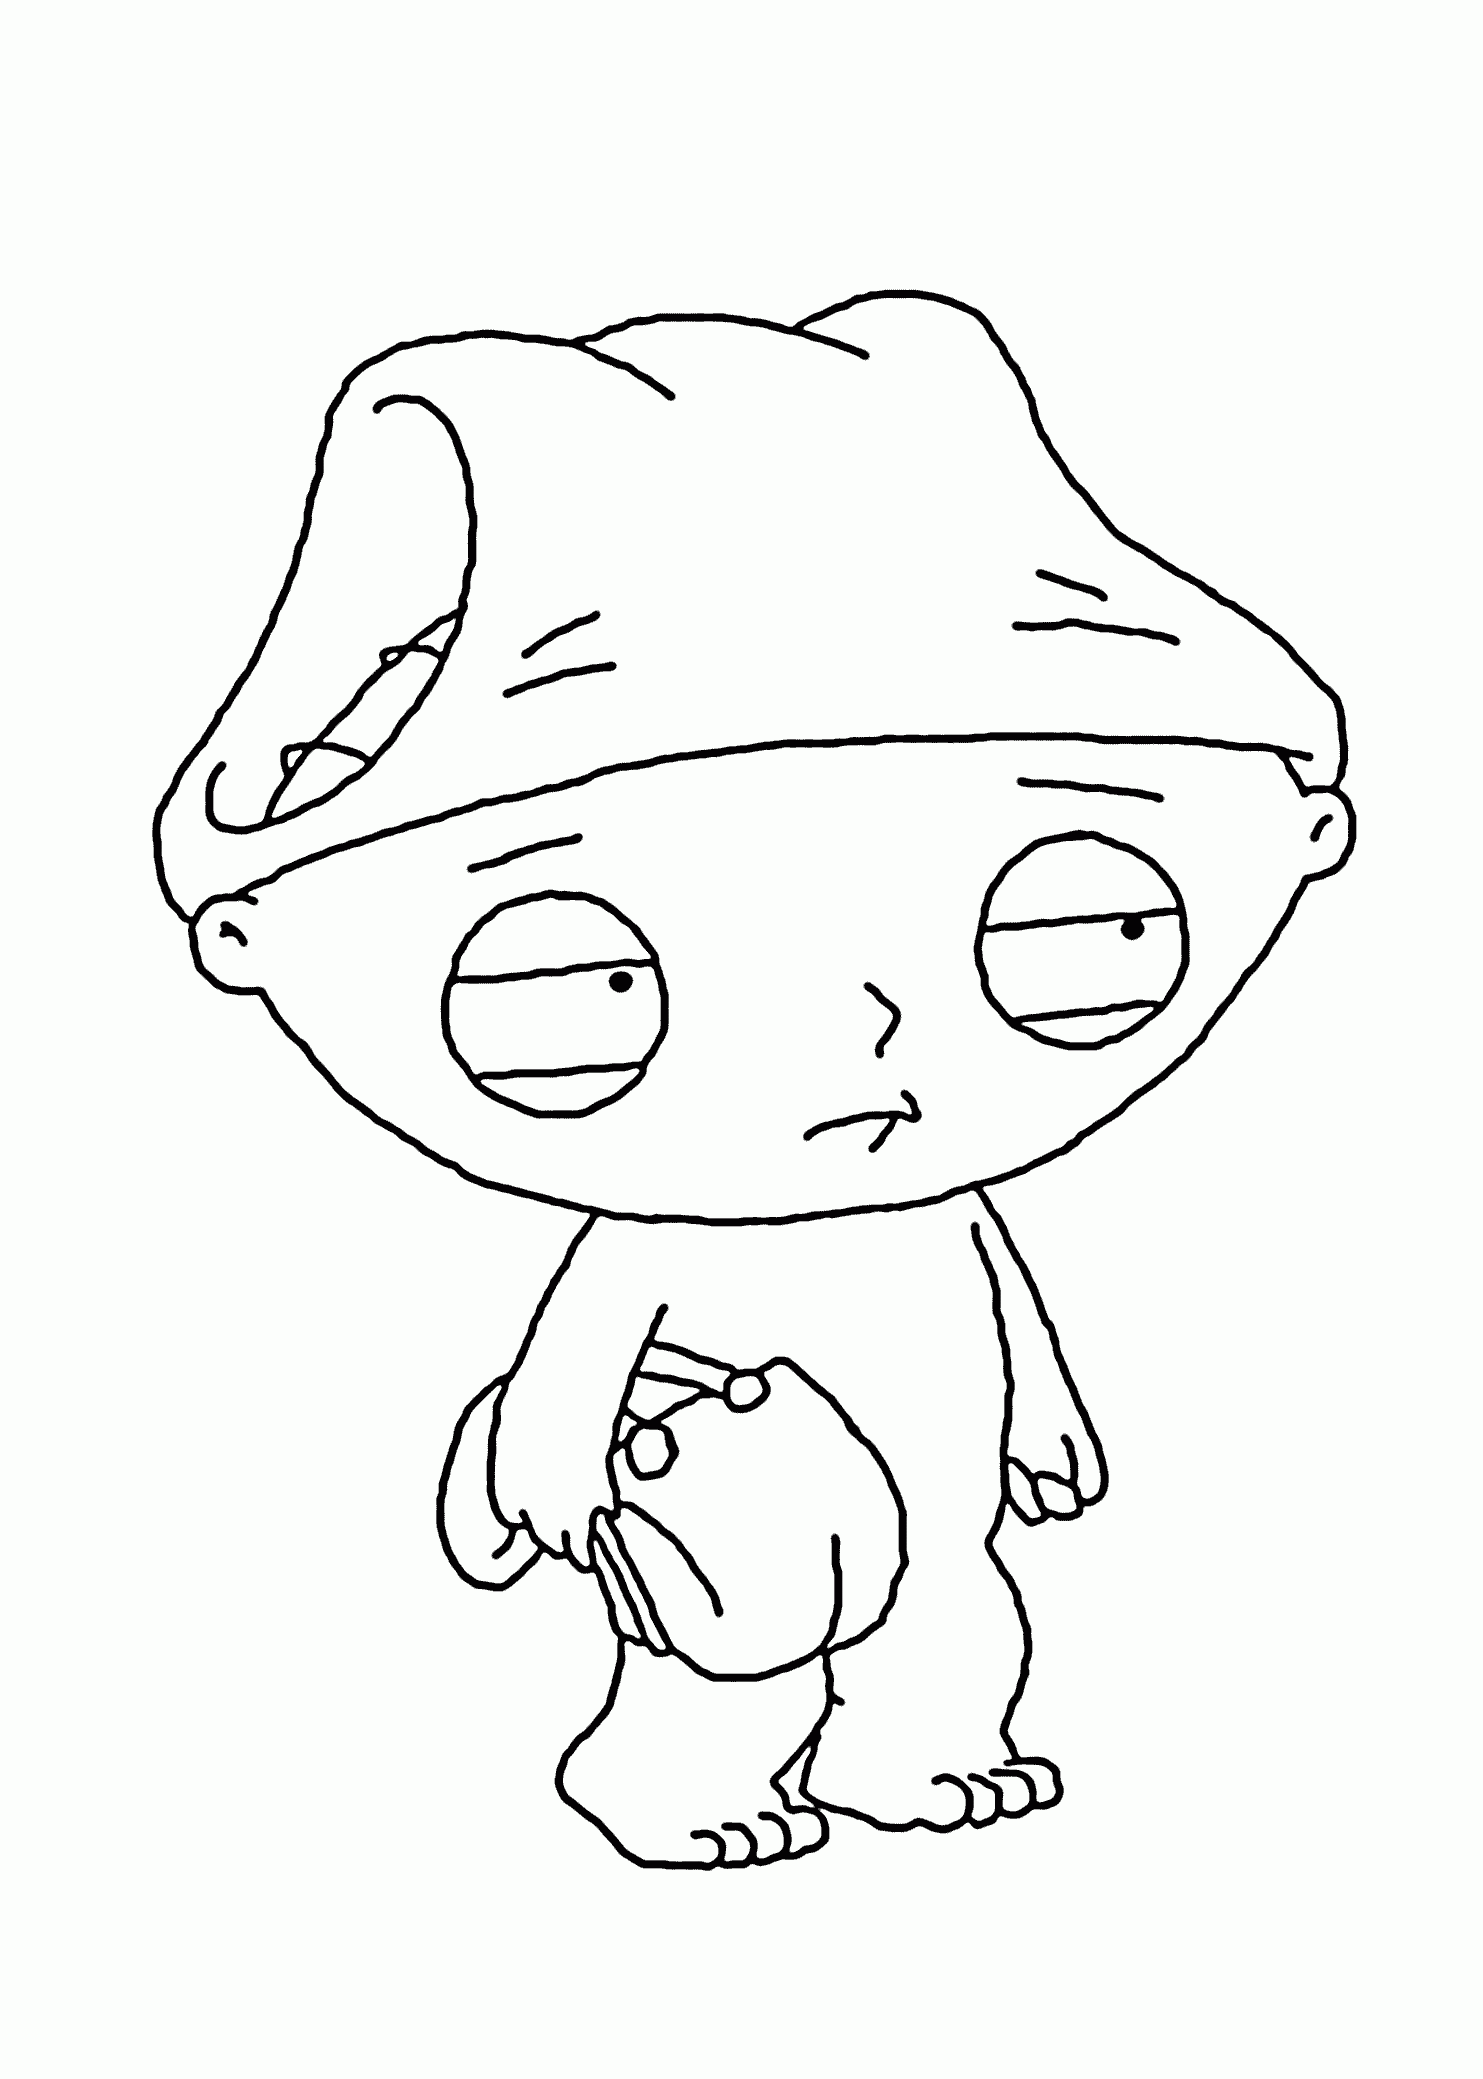 Related Family Guy Coloring Pages item-10351, Family Guy Coloring ...